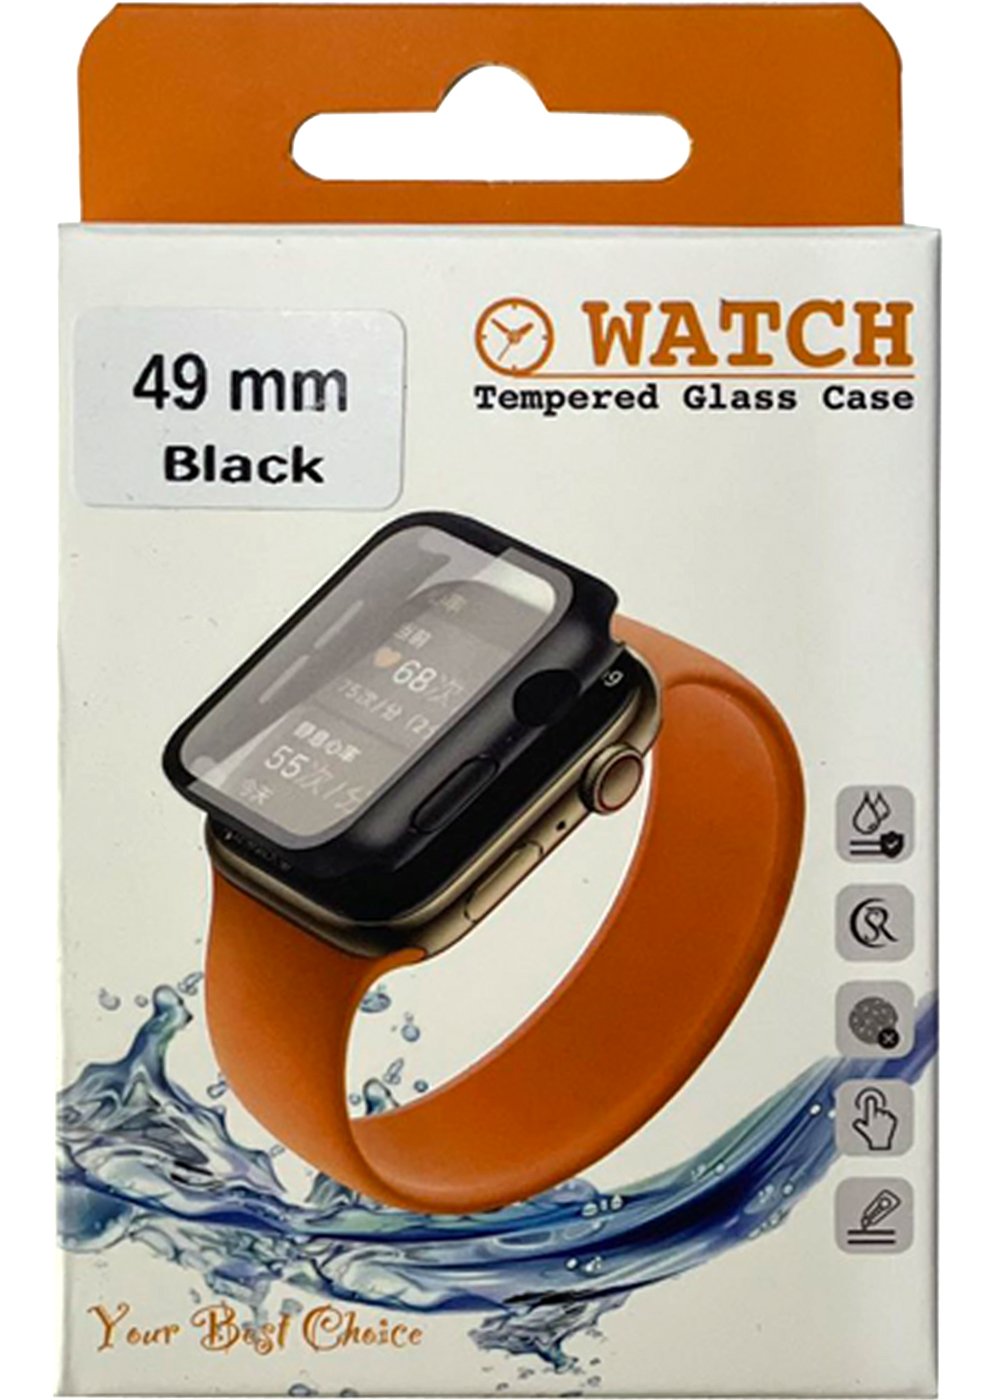 Apple Watch Case_ 49mm Black [with Tempered Glass Protection]